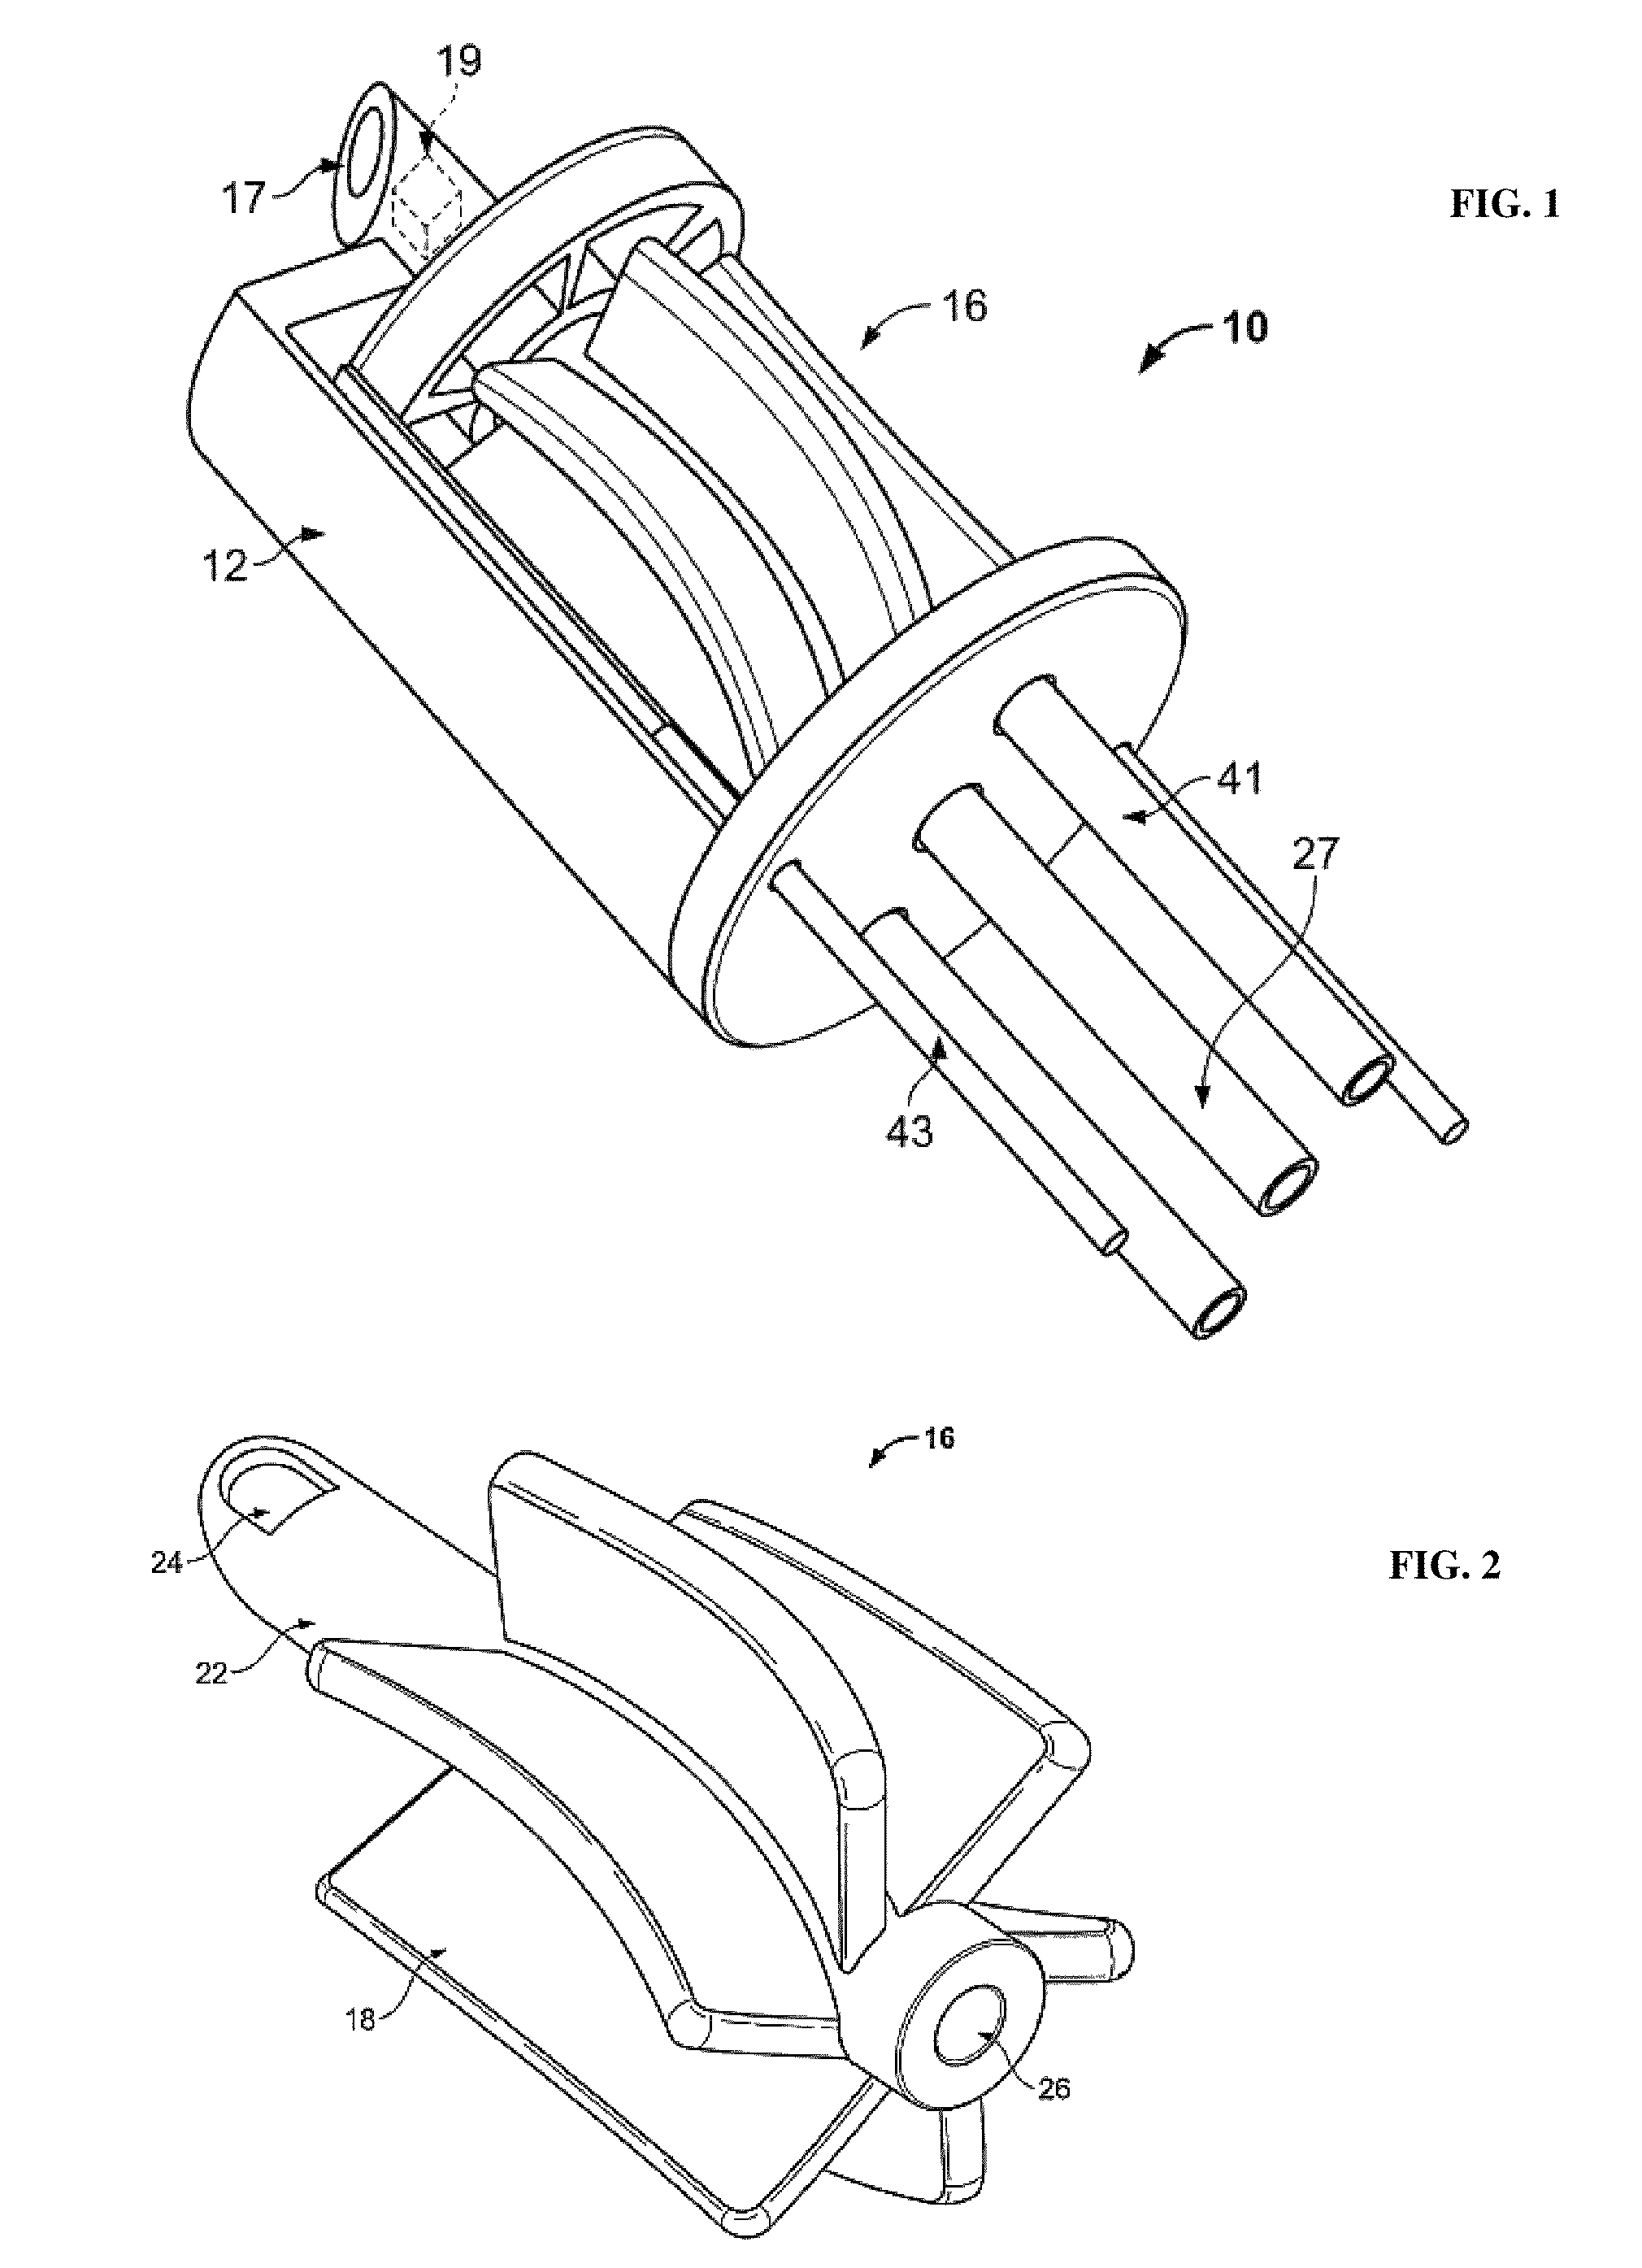 Rotating optical catheter tip for optical coherence tomography